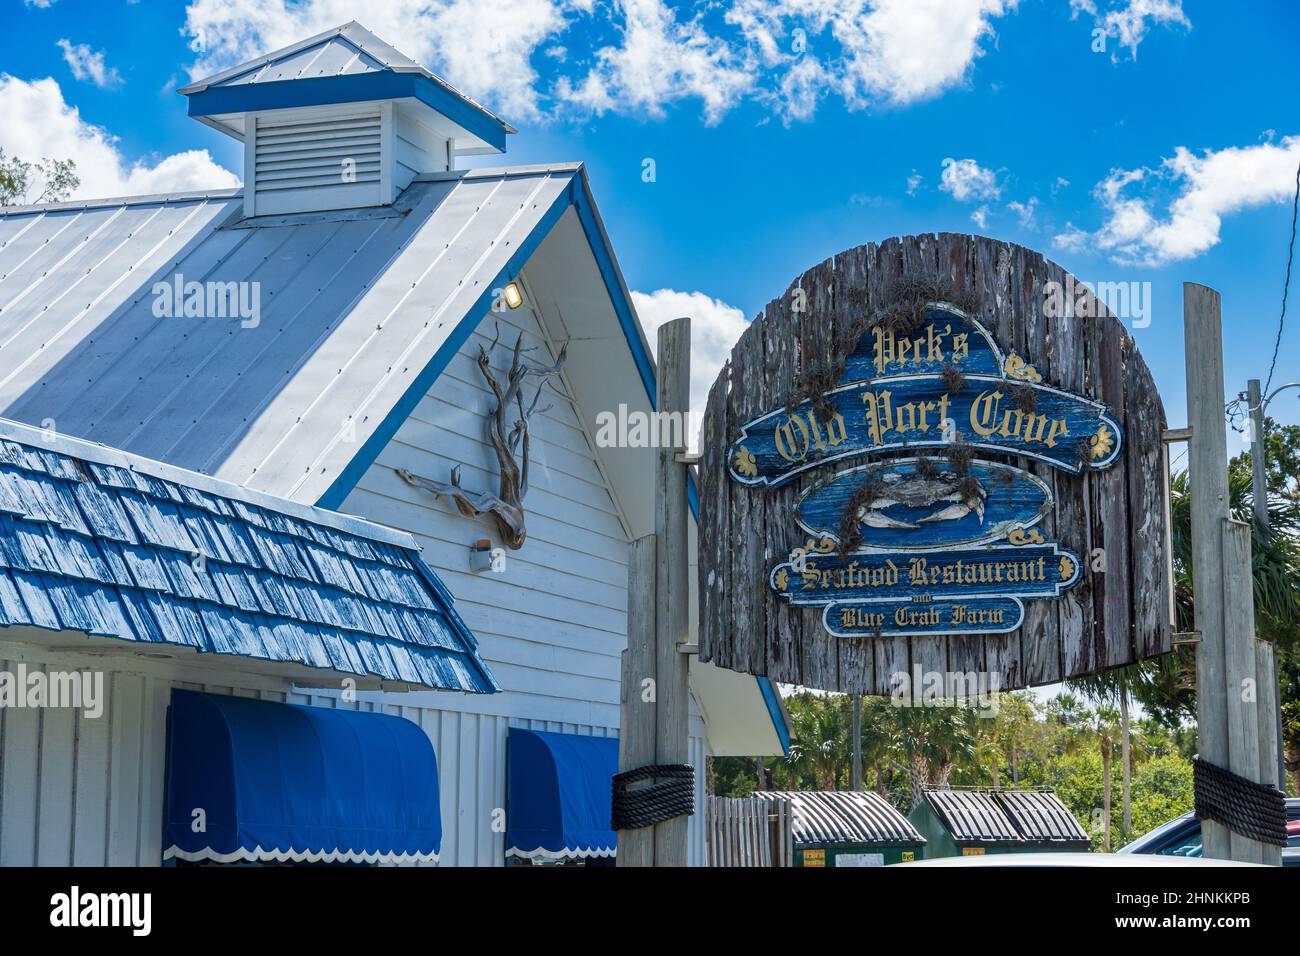 Peck's Old Port Cove Seafood Restaurant and Blue Crab Farm in Ozello - Crystal River, Florida, USA Stock Photo